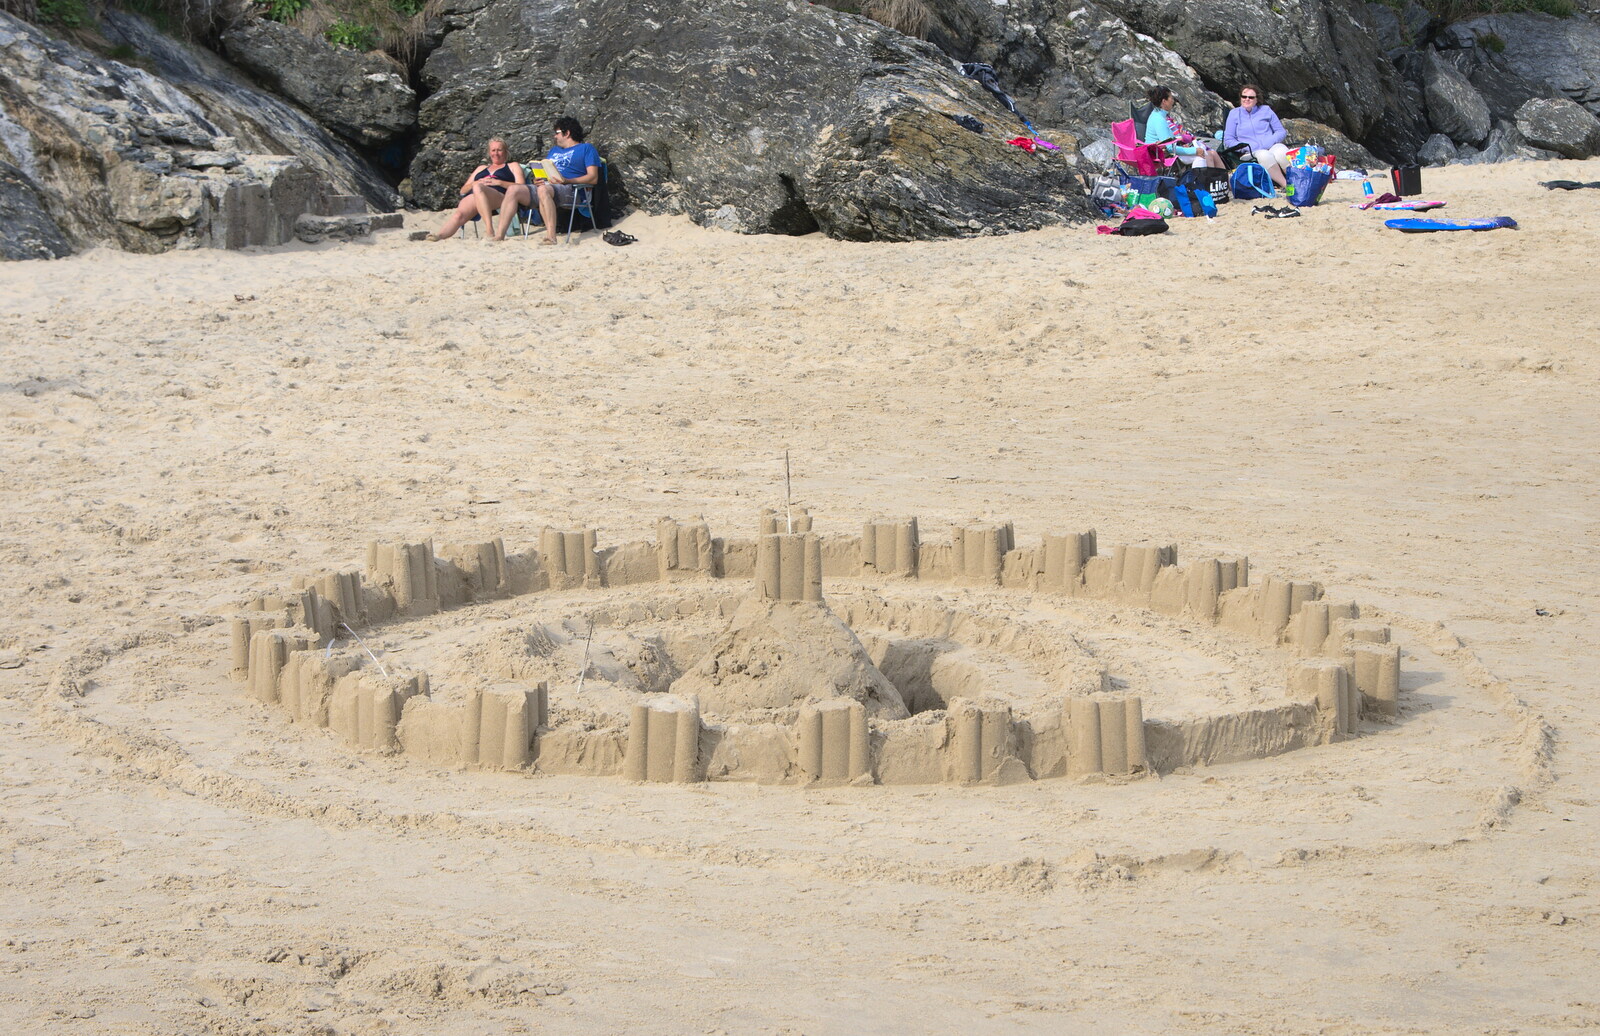 Someone has built an impressive sand castle from Camping at Silver Strand, Wicklow, County Wicklow, Ireland - 7th August 2014